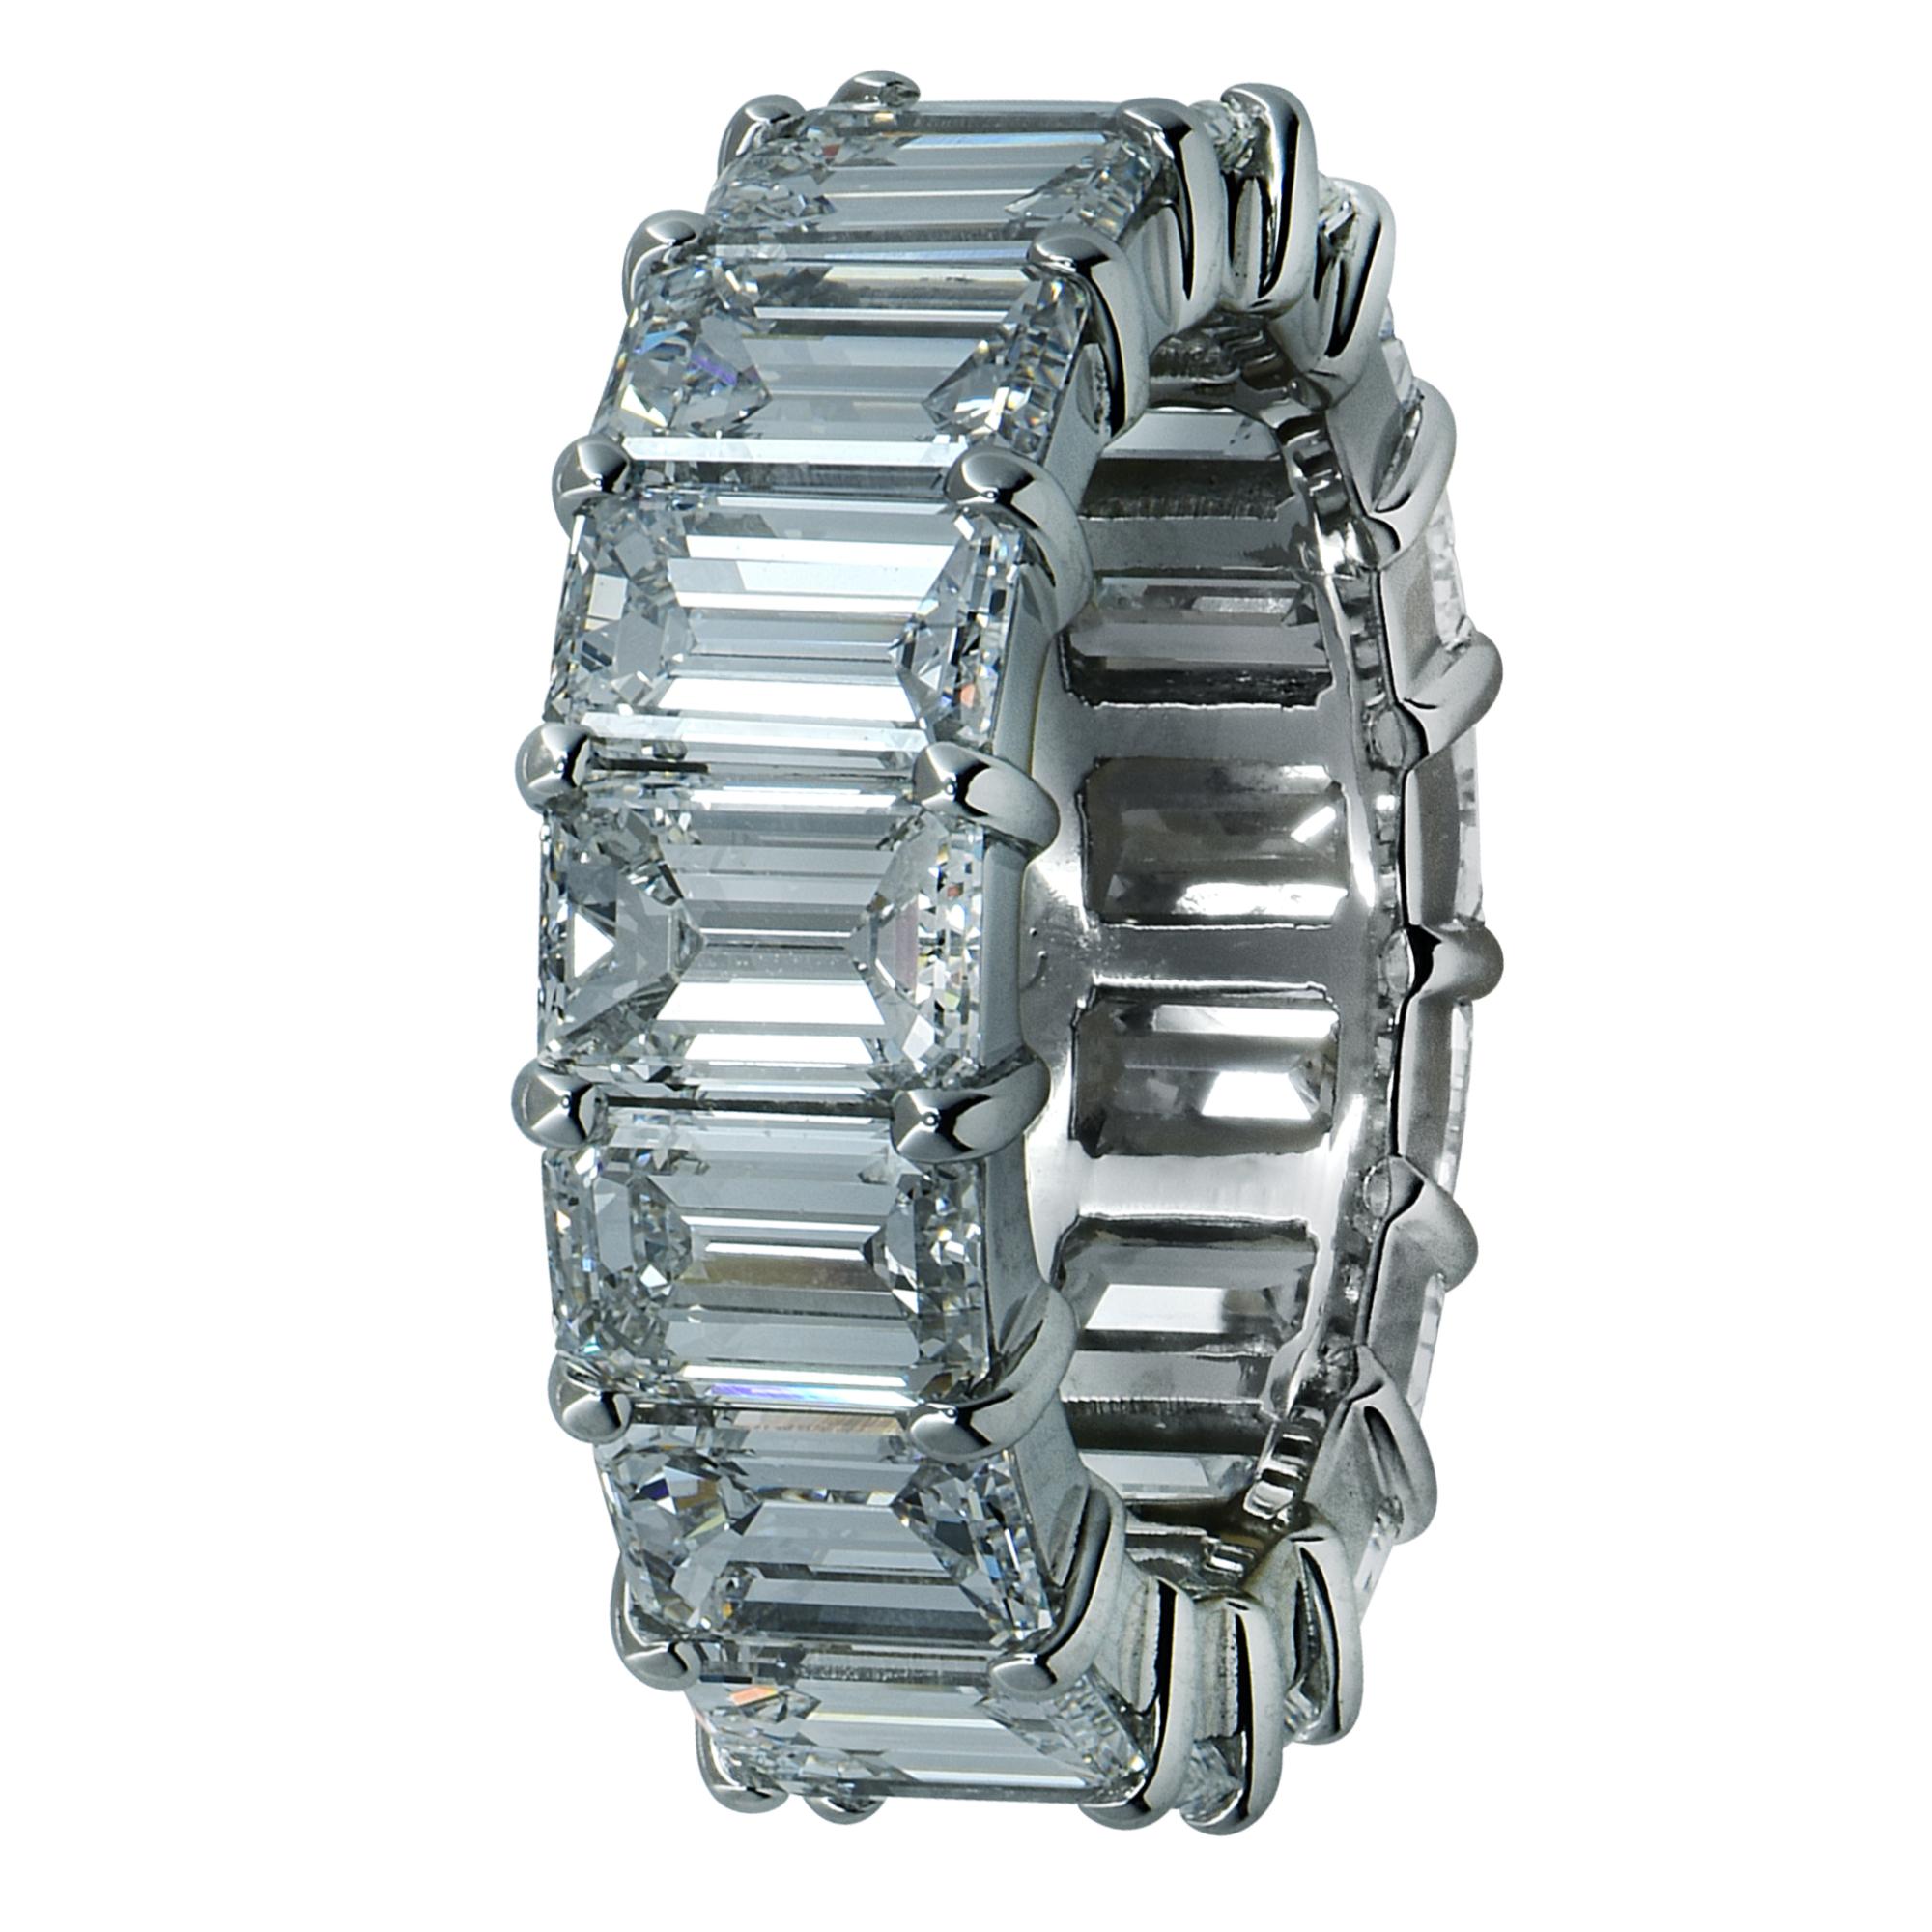 Exquisite Vivid Diamonds eternity band crafted by hand in Platinum, showcasing 17 stunning emerald cut diamonds weighing 9.60 carats total, F color, VS clarity. The diamonds are set in a seamless sea of eternity, creating a spectacular symphony of